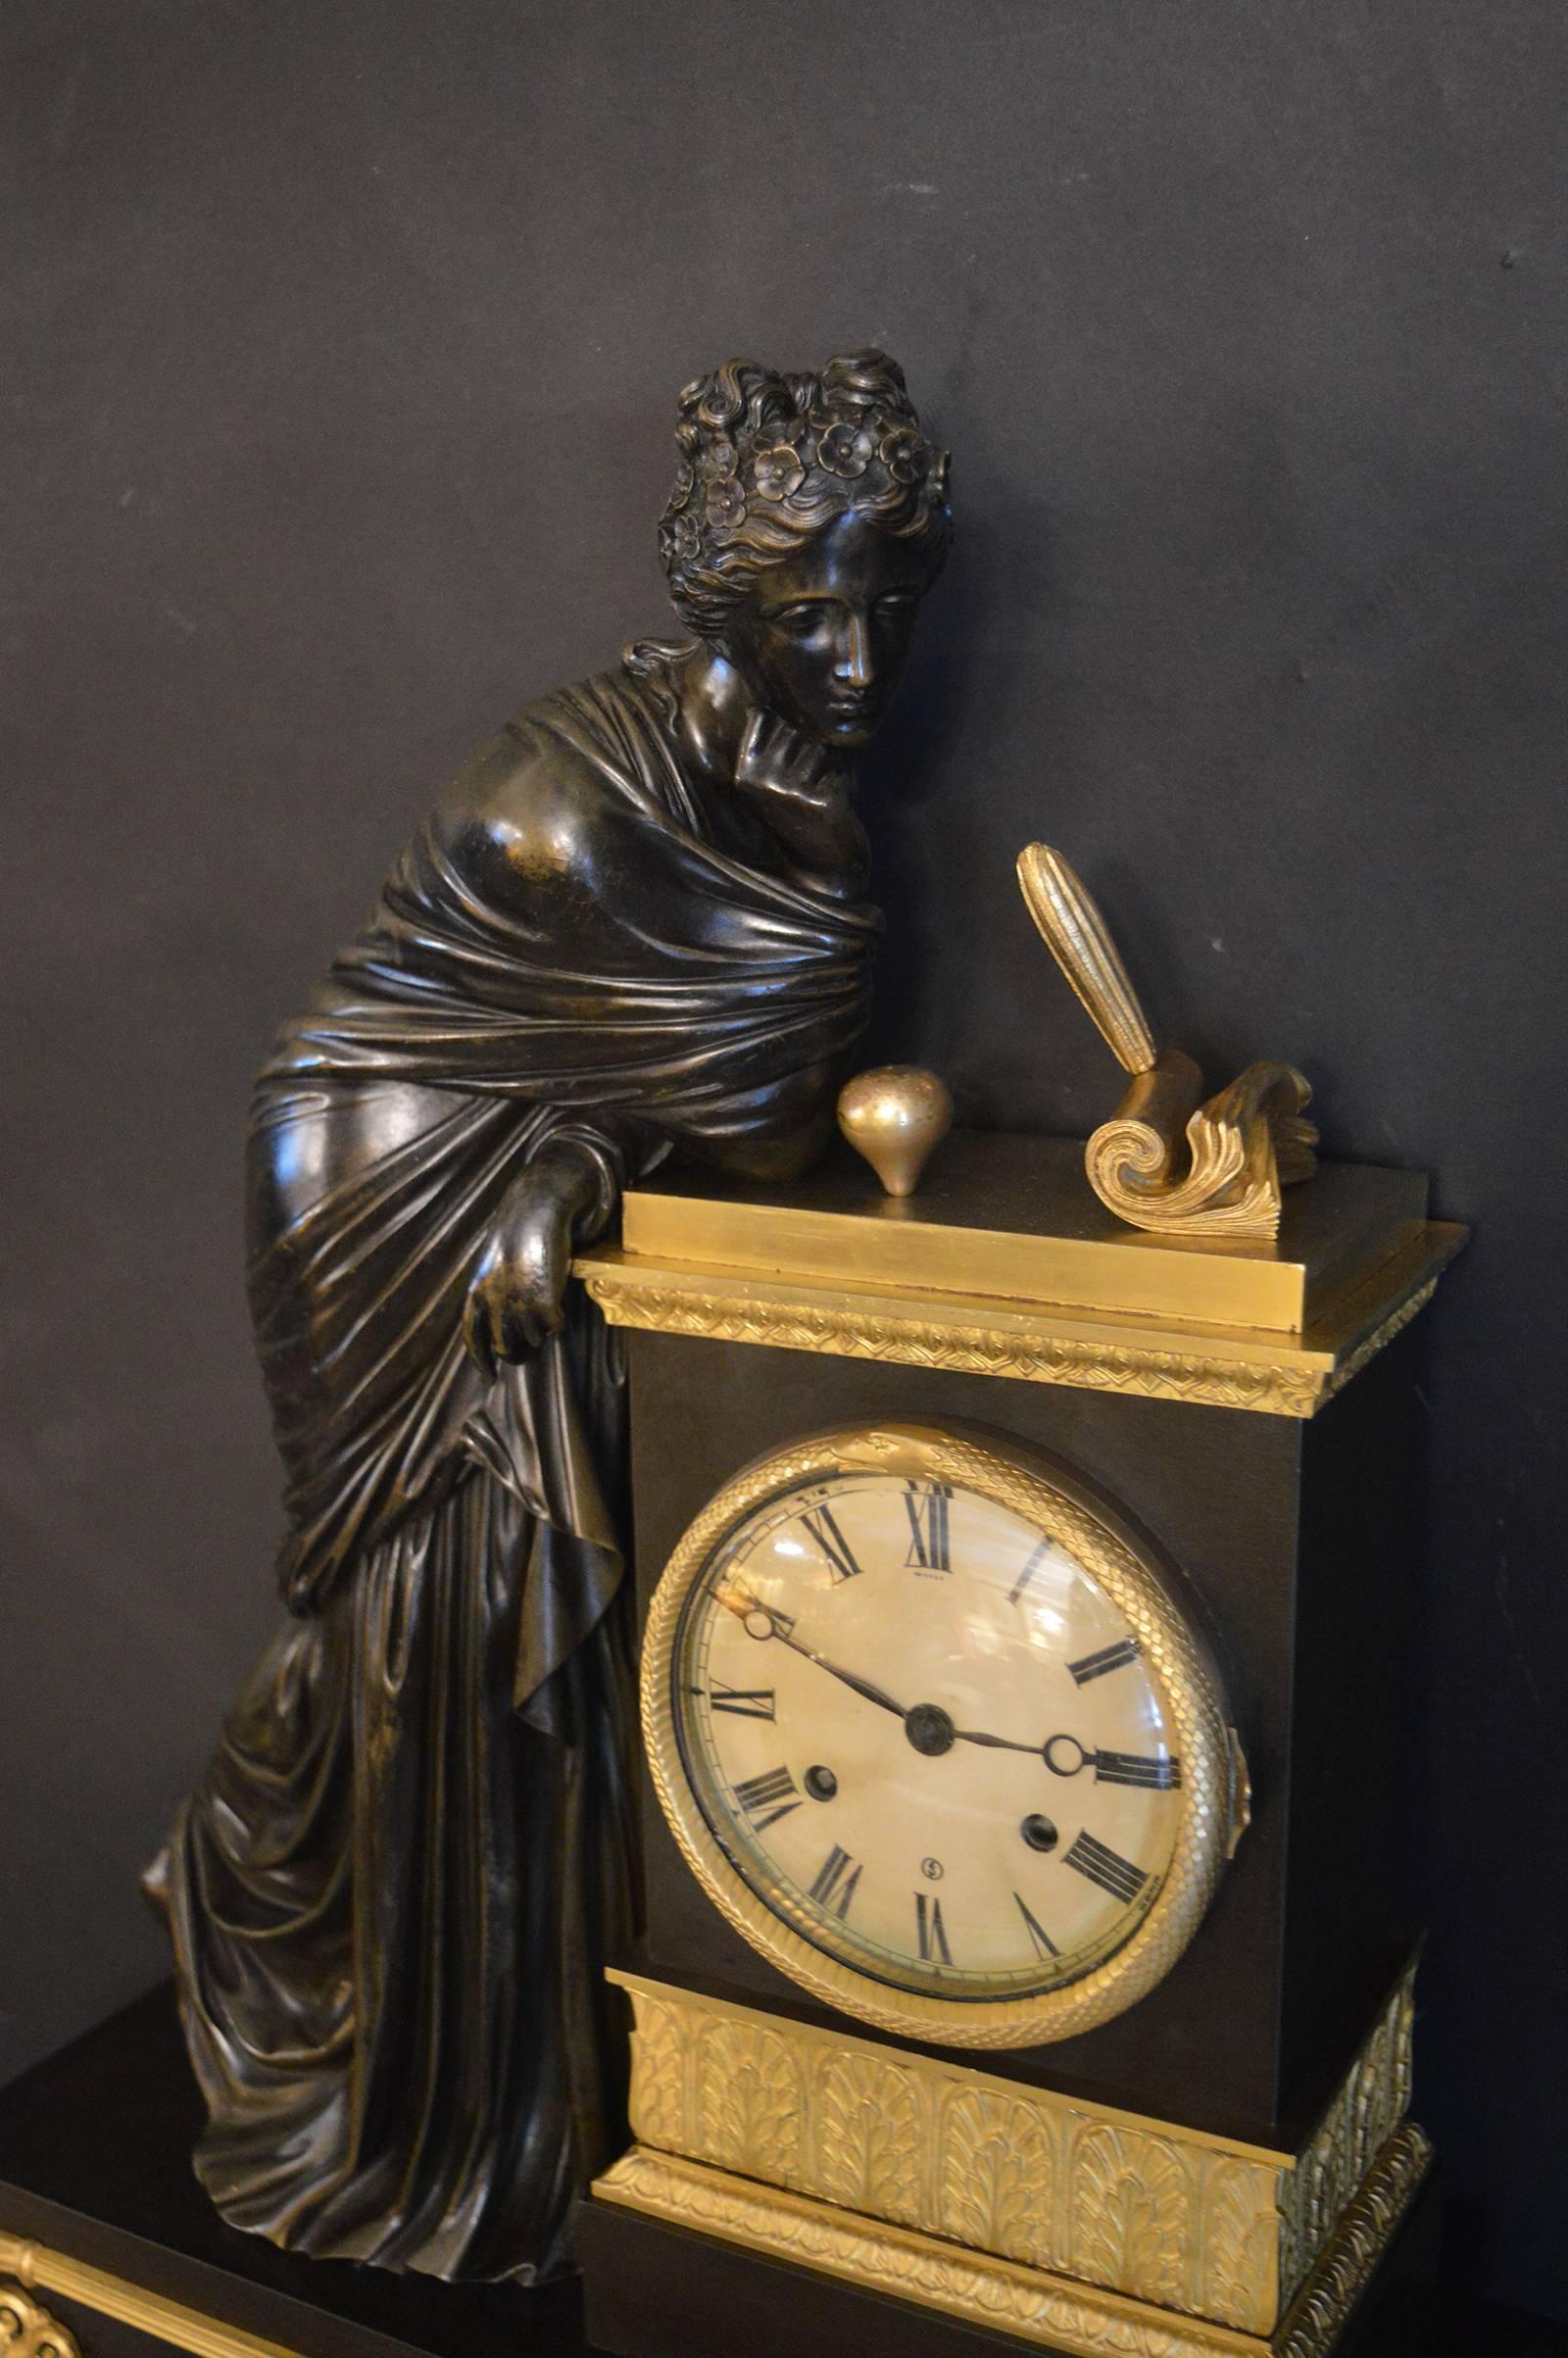 Large, 19th century French clock.